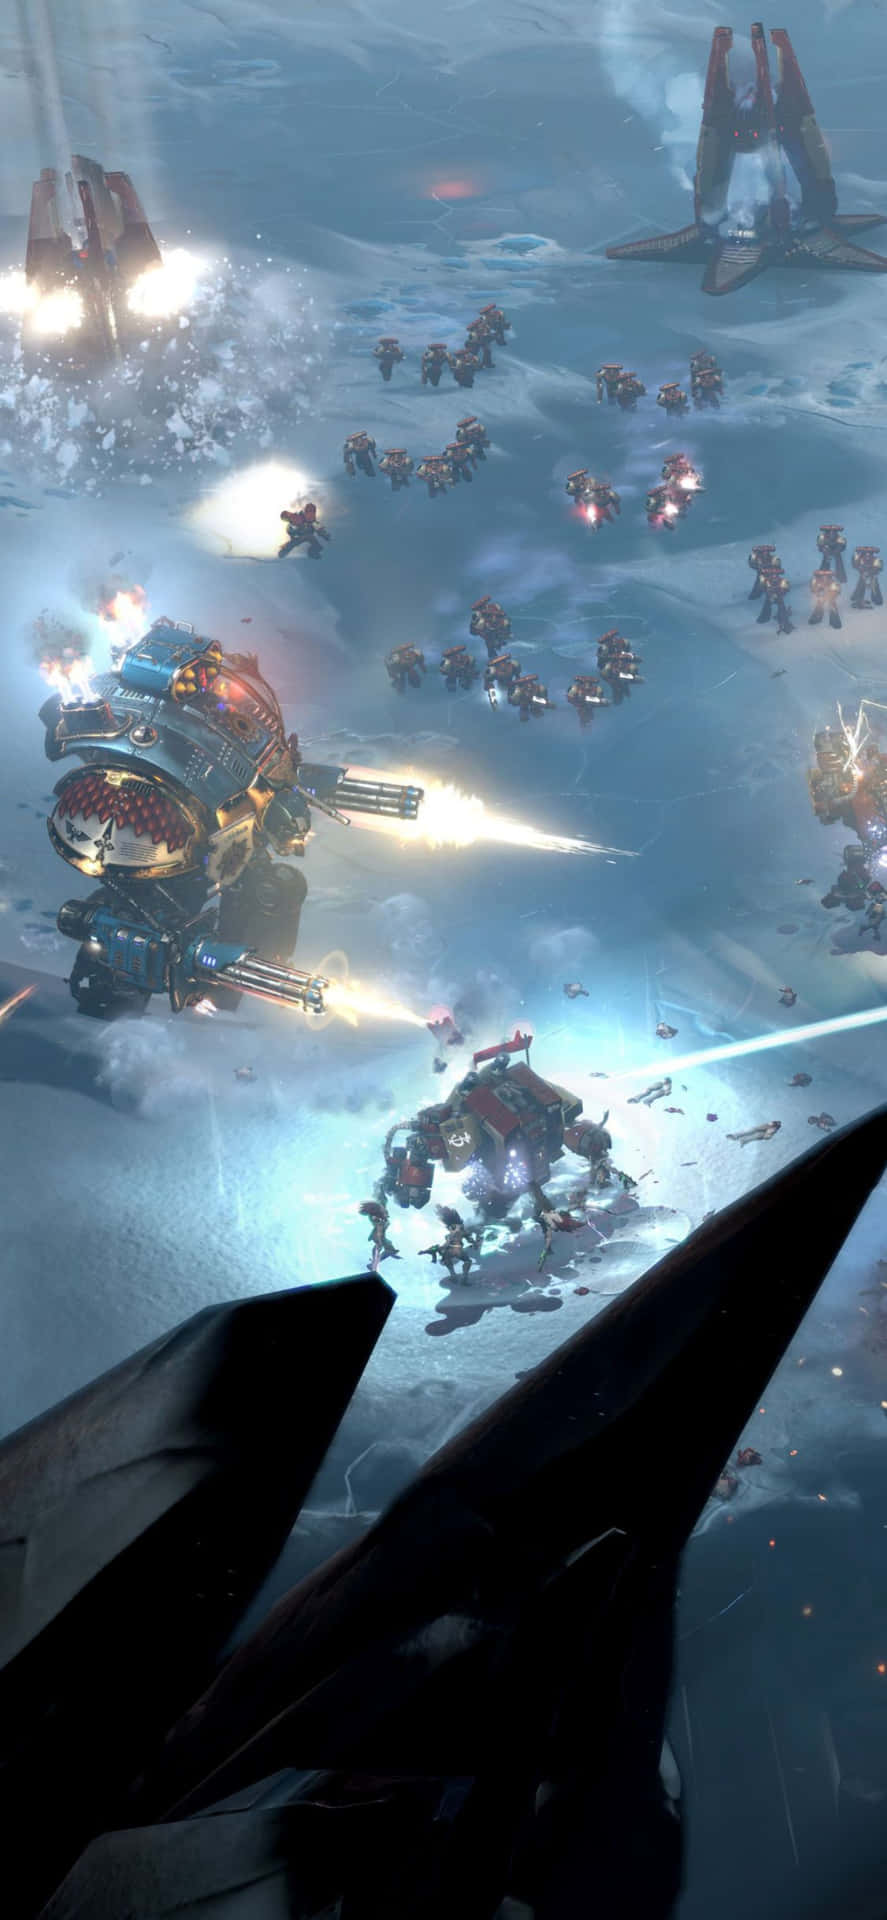 Dive into Battle with Iphone Xs Dawn Of War III